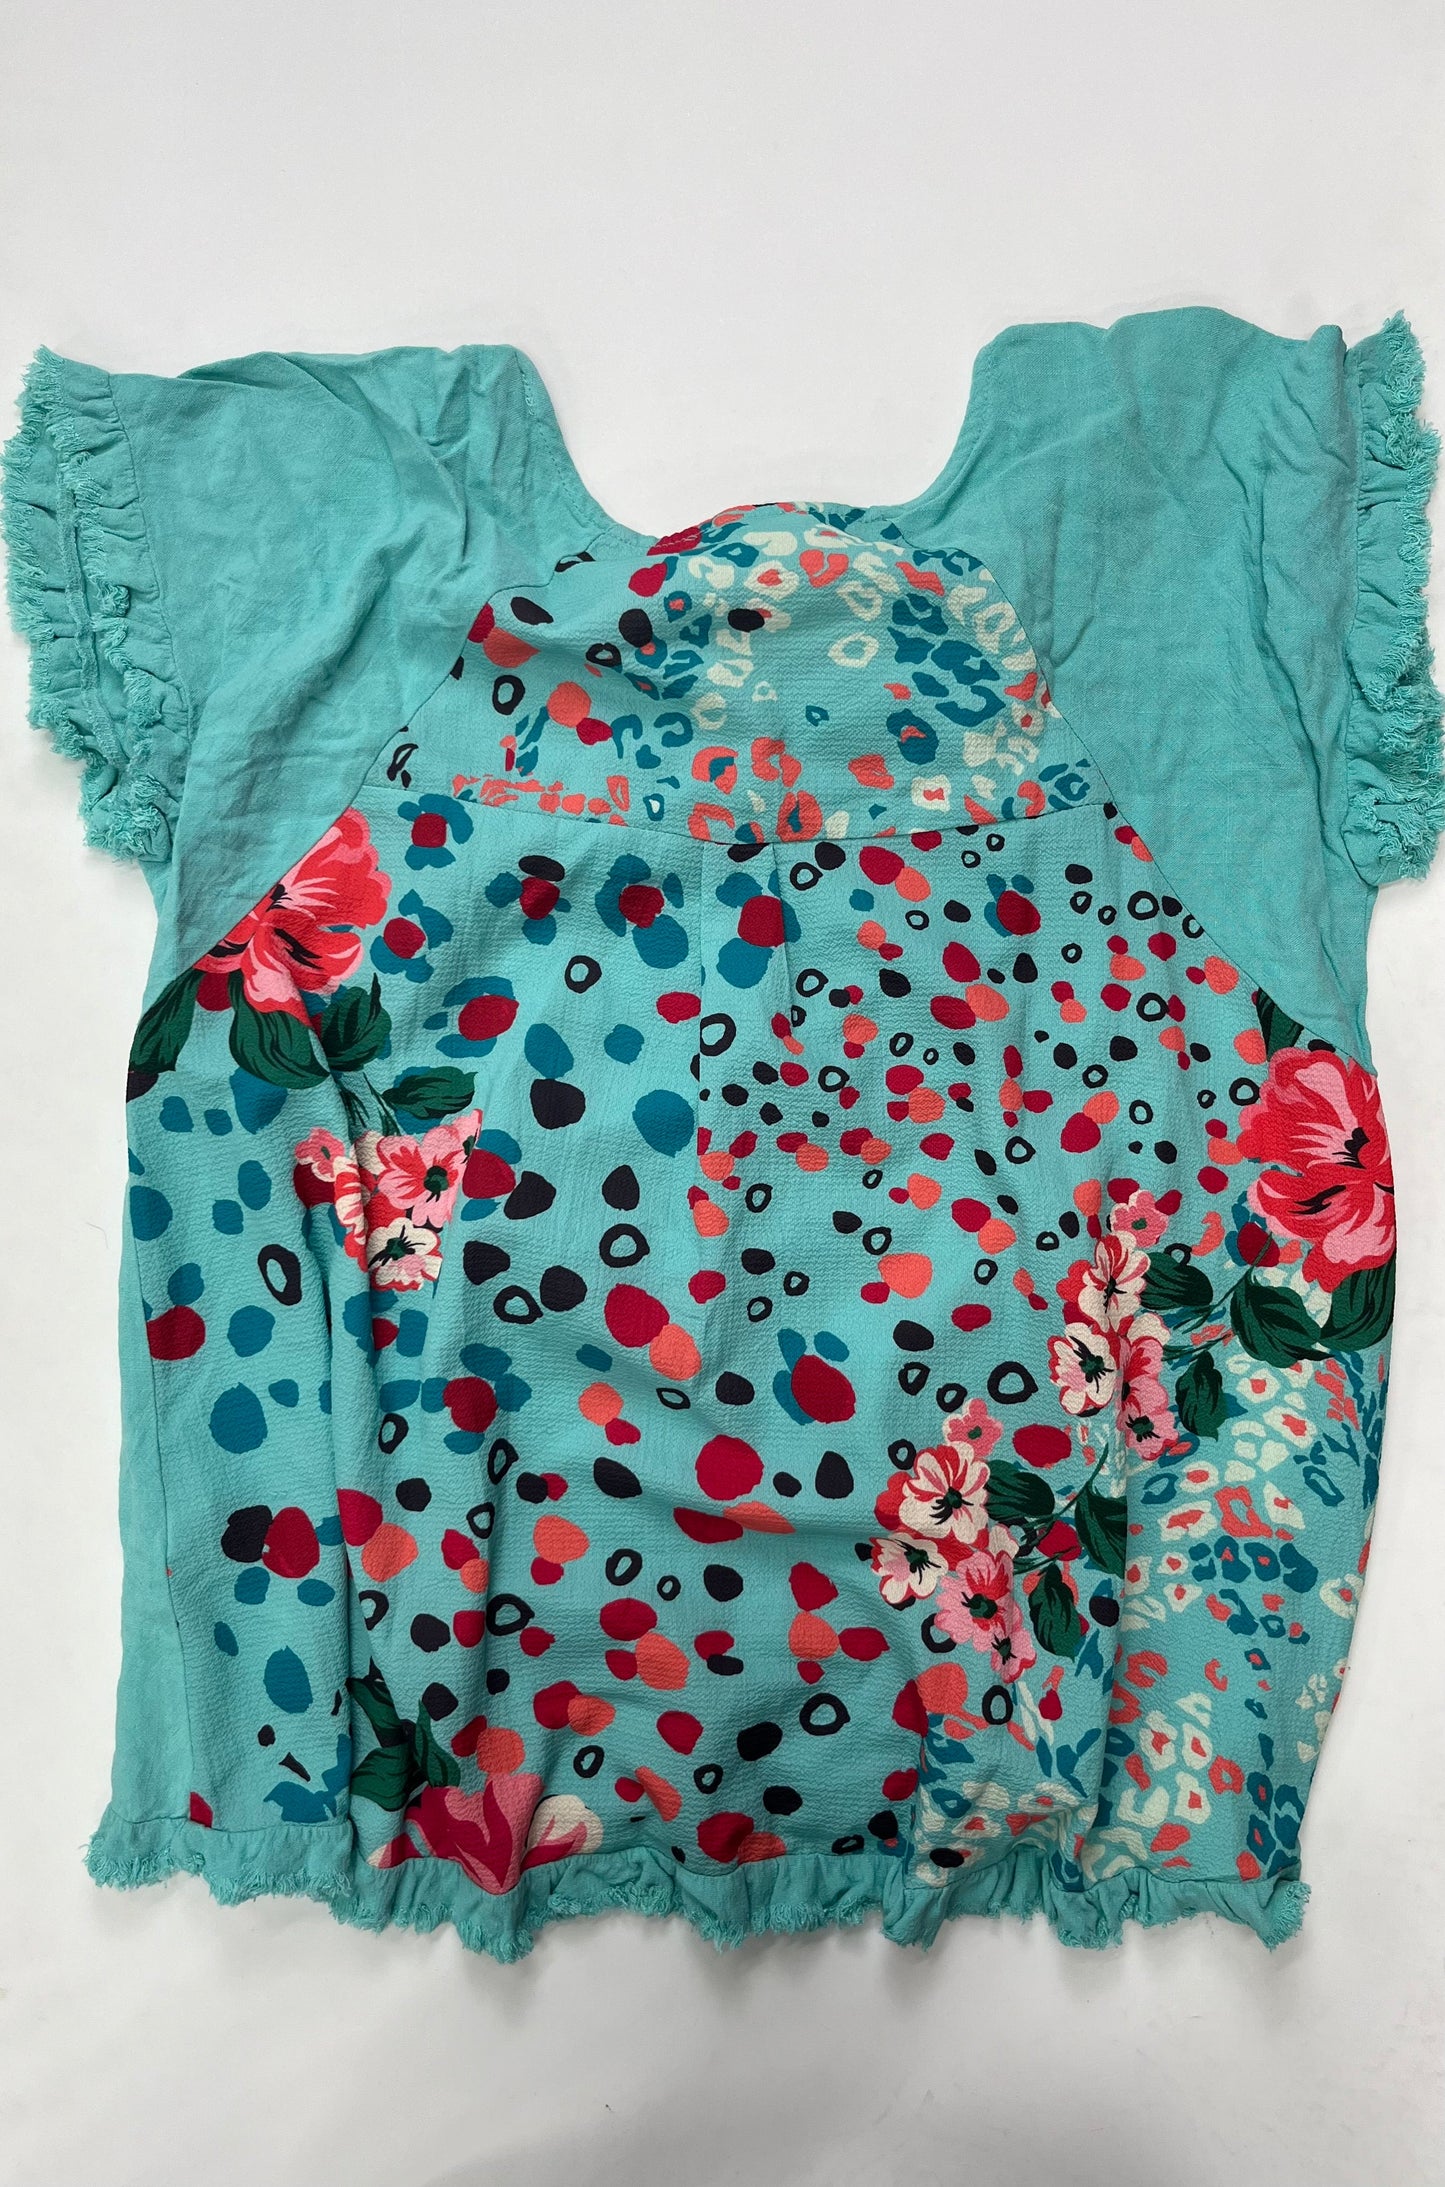 Top Short Sleeve By Umgee  Size: M